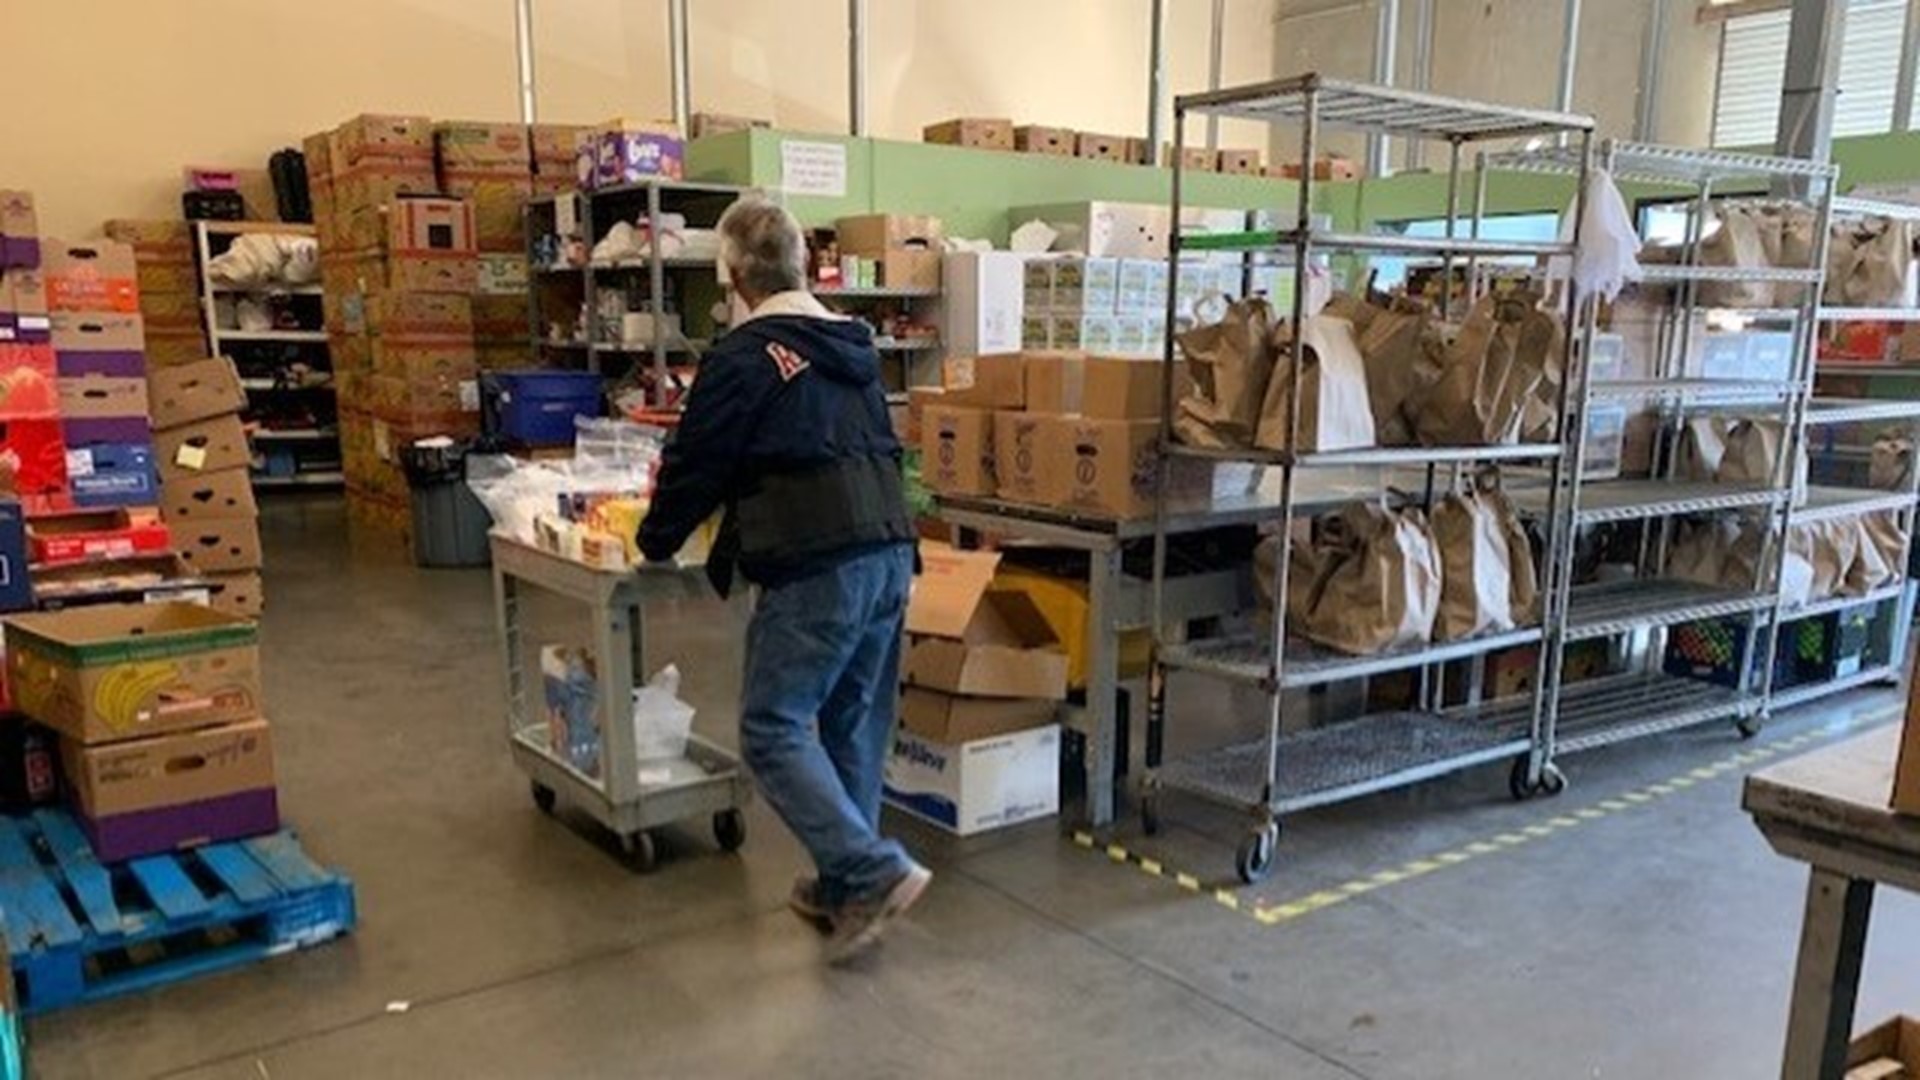 It was a cry for help heard loud and clear. The food bank got a flood of community donations after announcing weeks ago that it would soon run out of food.